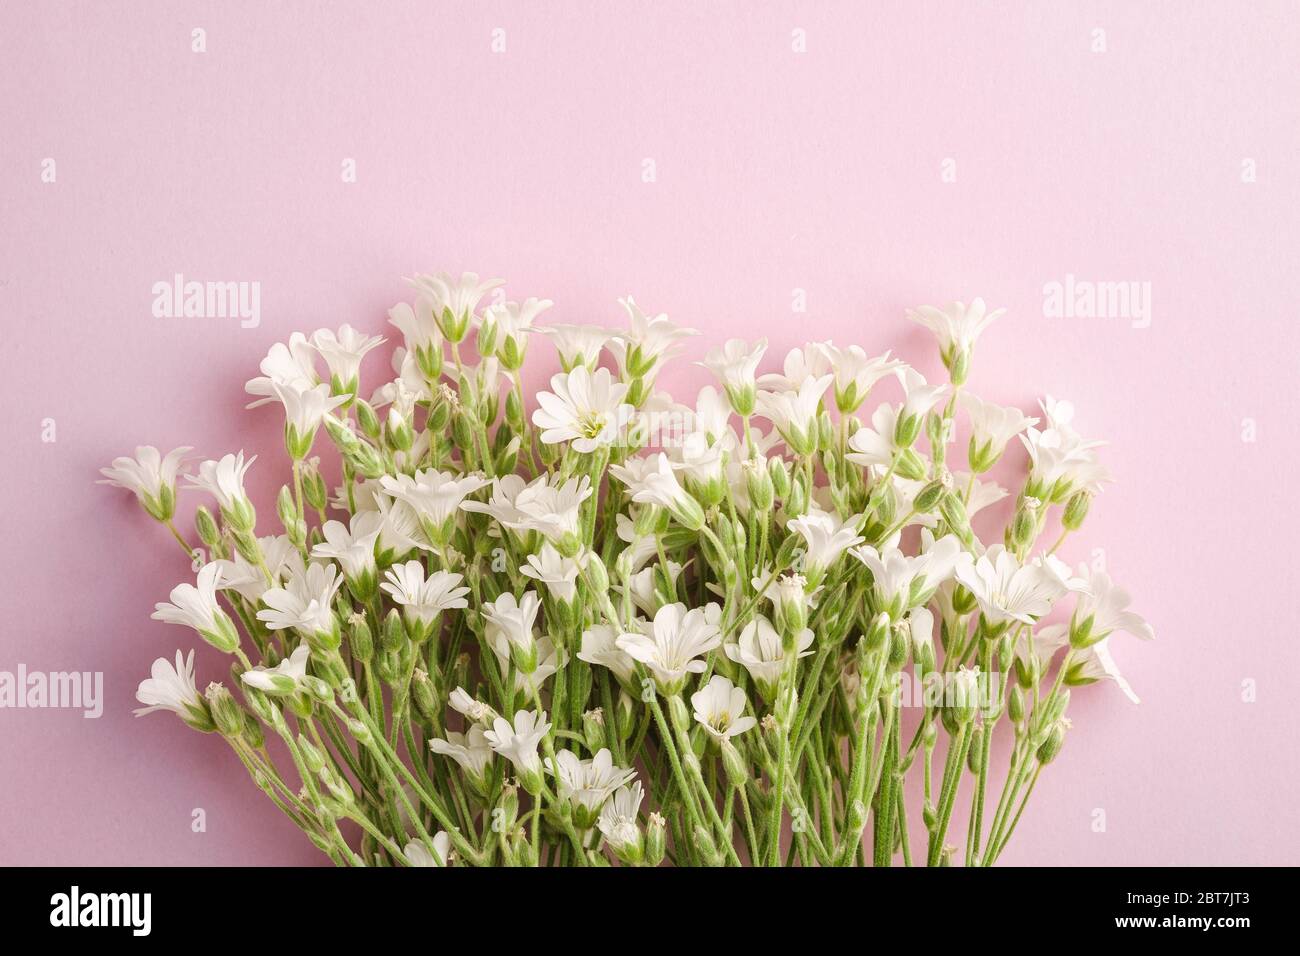 White mouse-ear chickweed flowers on pink background, top view copy space Stock Photo